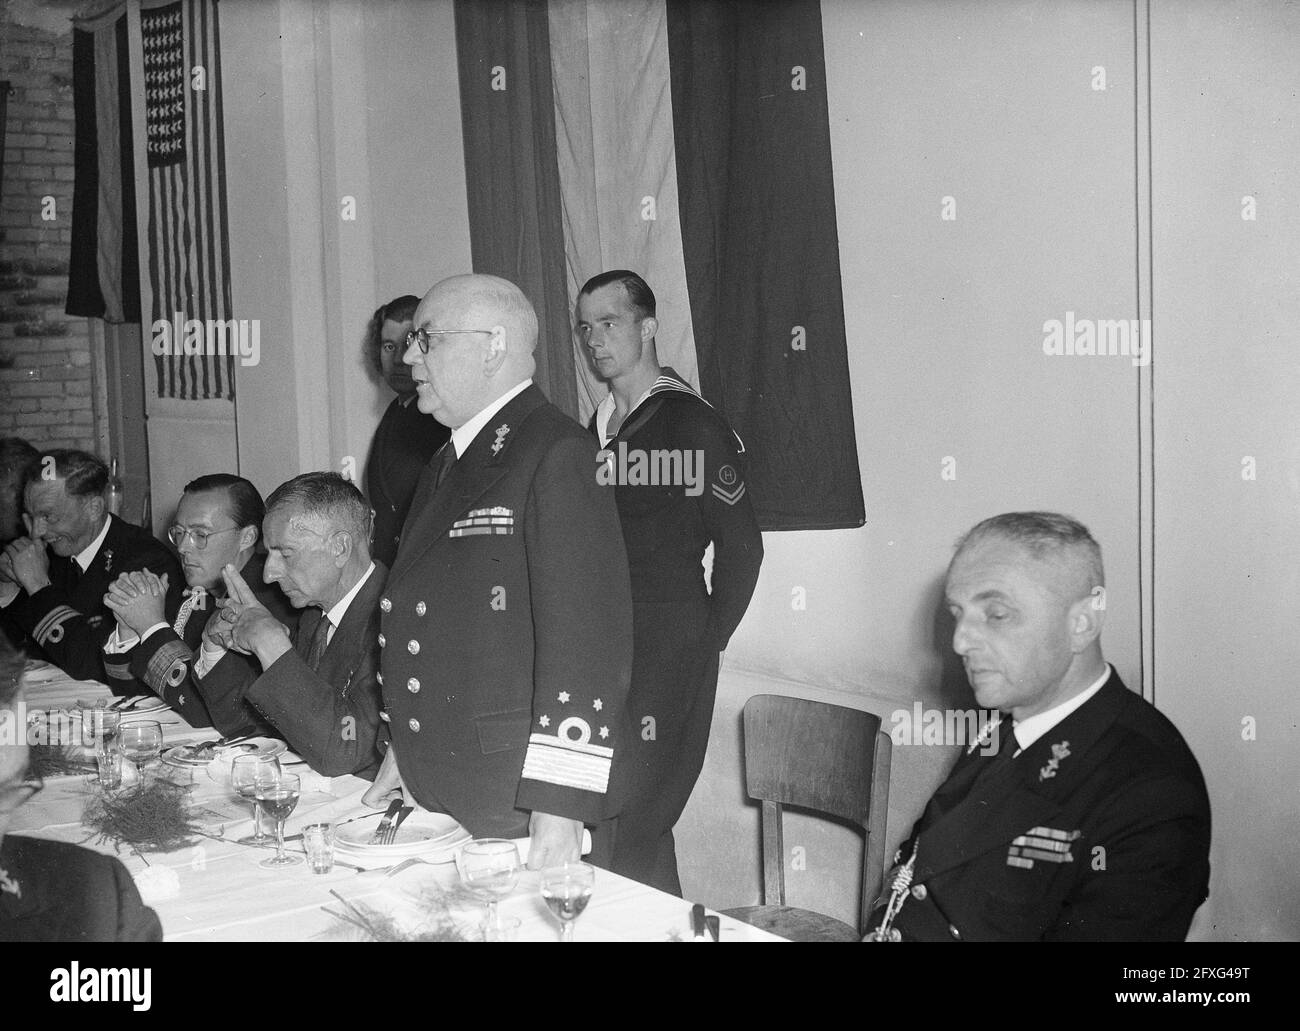 Forty-year anniversary of Submarine Service... Dinner officers reunites. Speech by Vice Admiral Helfrich, June 18, 1947, anniversaries, meals, Navy, officers, The Netherlands, 20th century press agency photo, news to remember, documentary, historic photography 1945-1990, visual stories, human history of the Twentieth Century, capturing moments in time Stock Photo